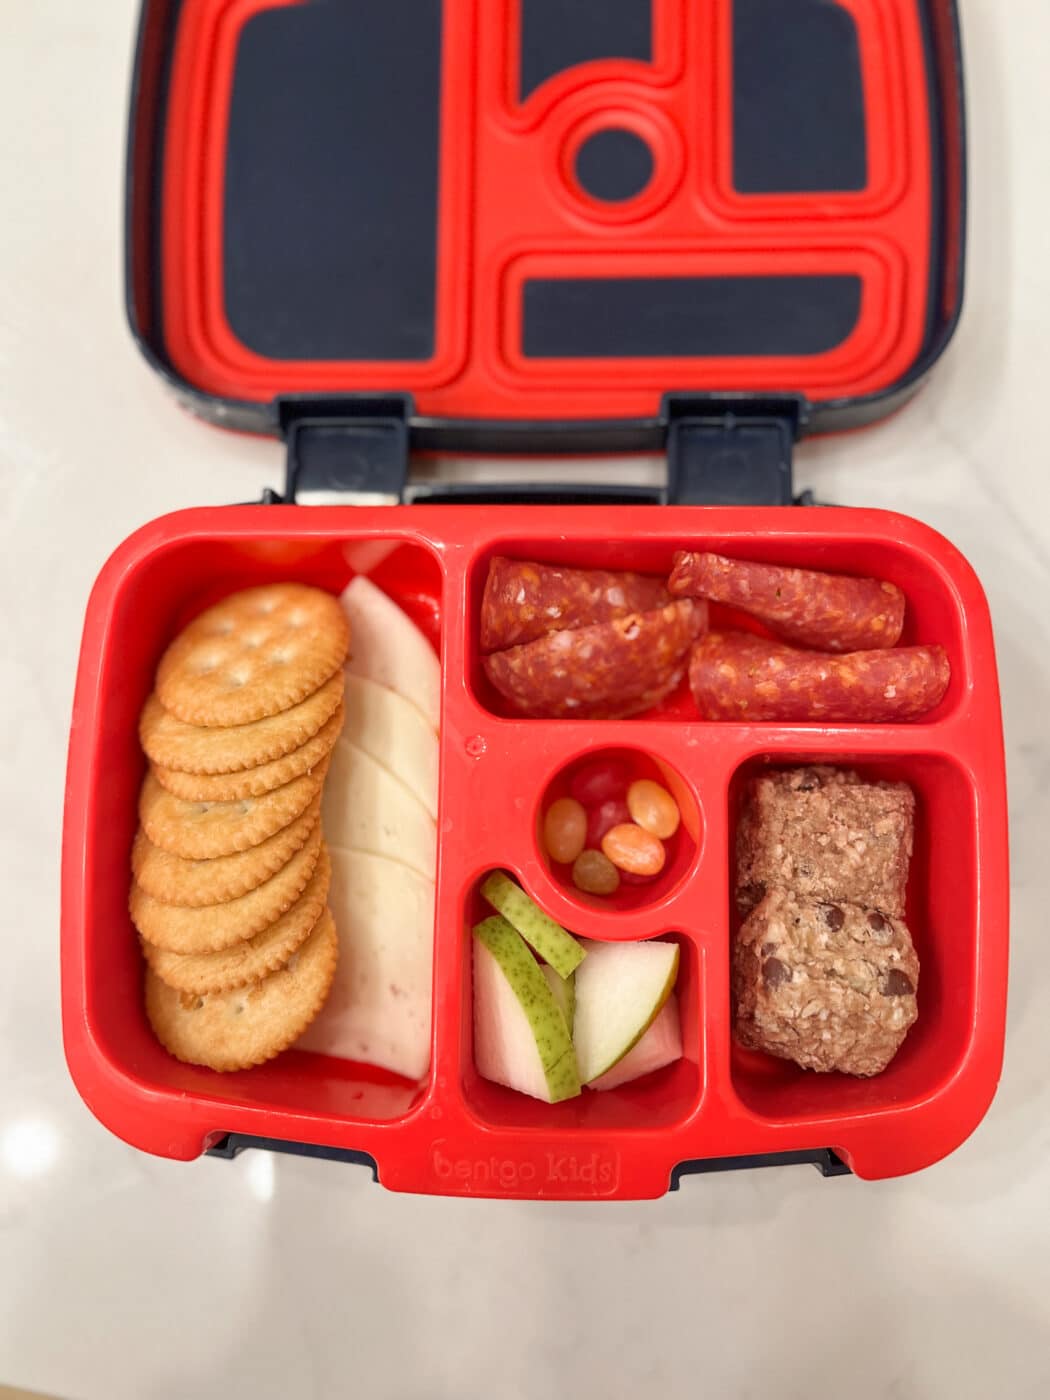 Creative Bentgo lunchbox lunches.